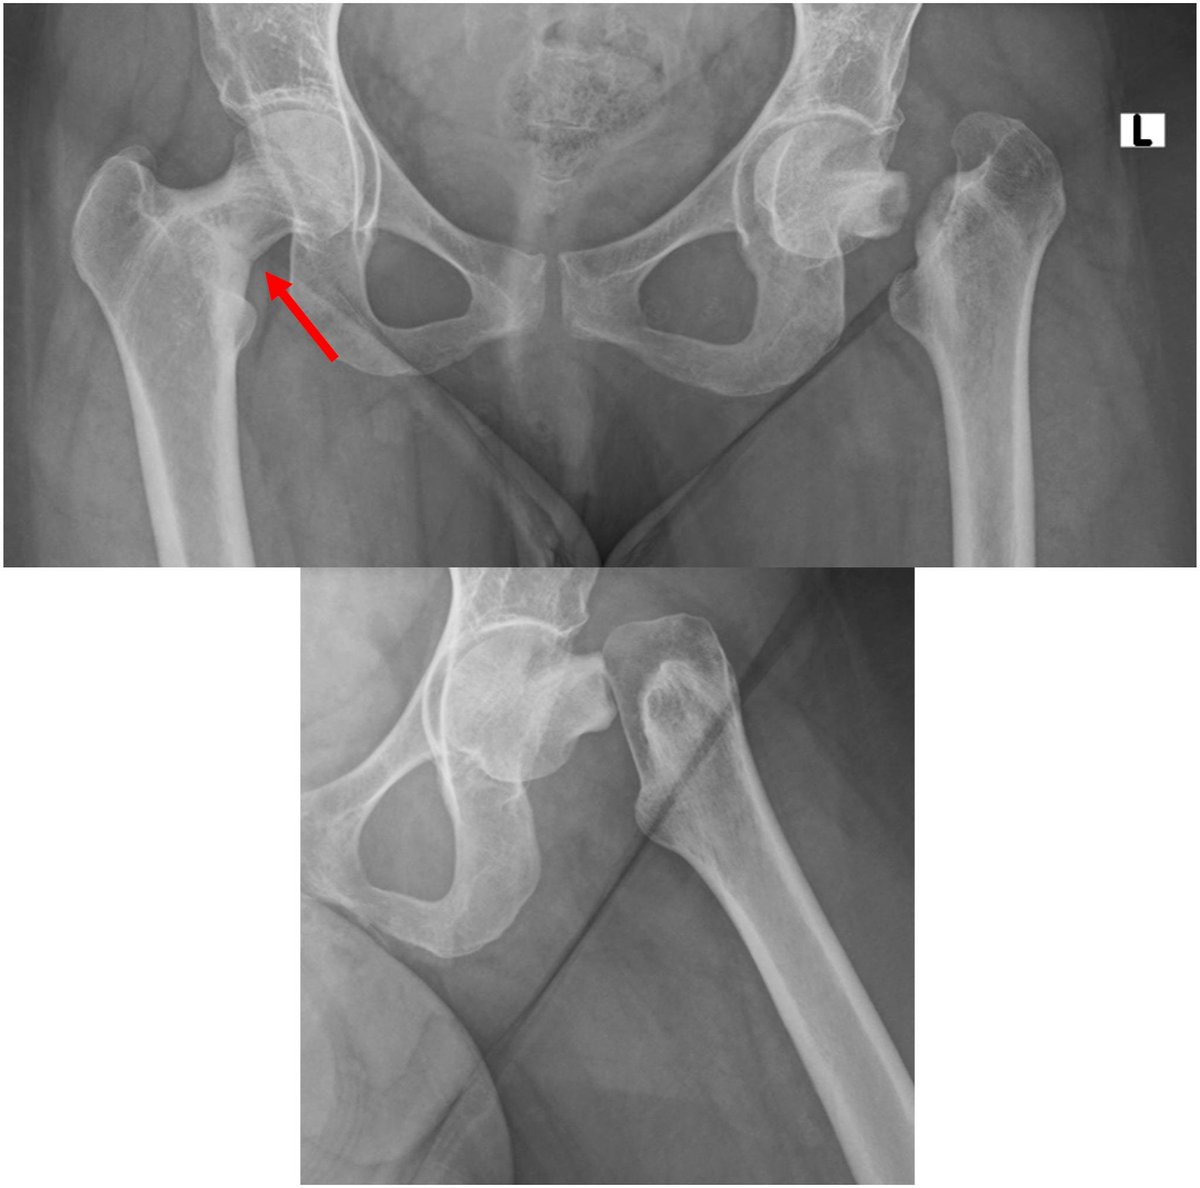 Unusual Presentation of Hip Pain in a Pregnant Woman Due to Bilateral Cervical Neck Stress Fractures #trauma #hip bit.ly/49IIerS